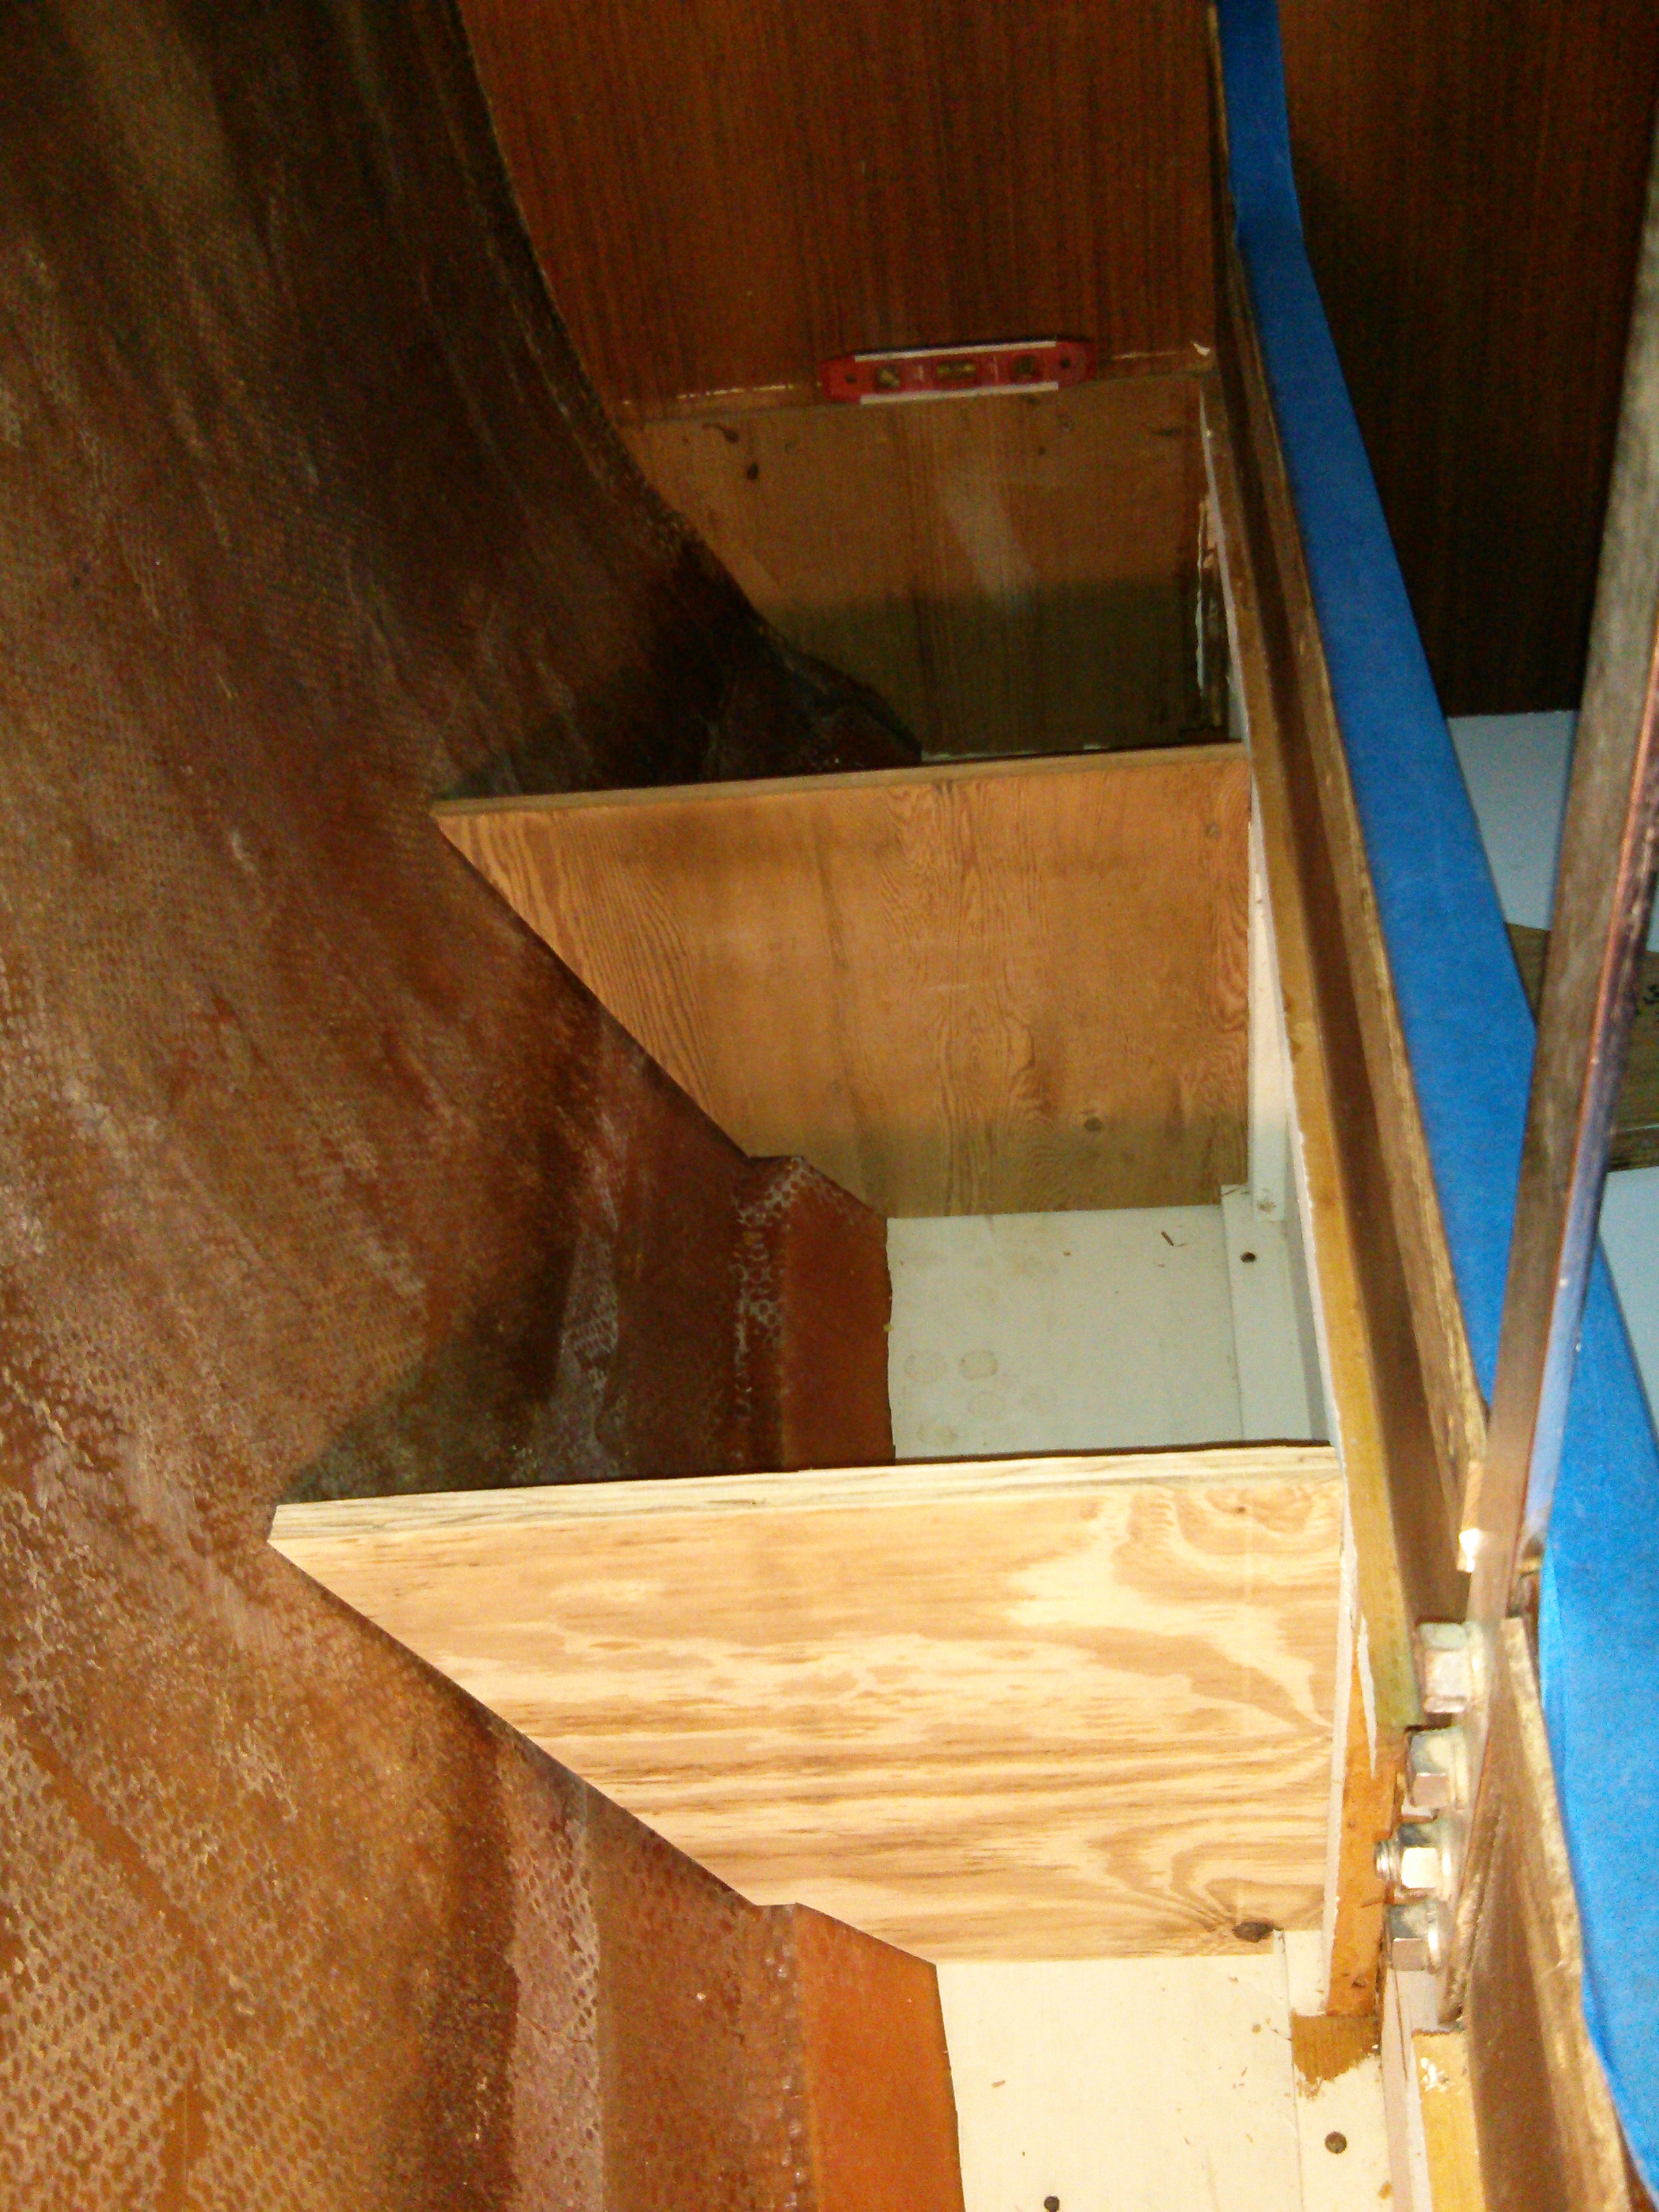 Test fitting new 3/4" plywood dividers